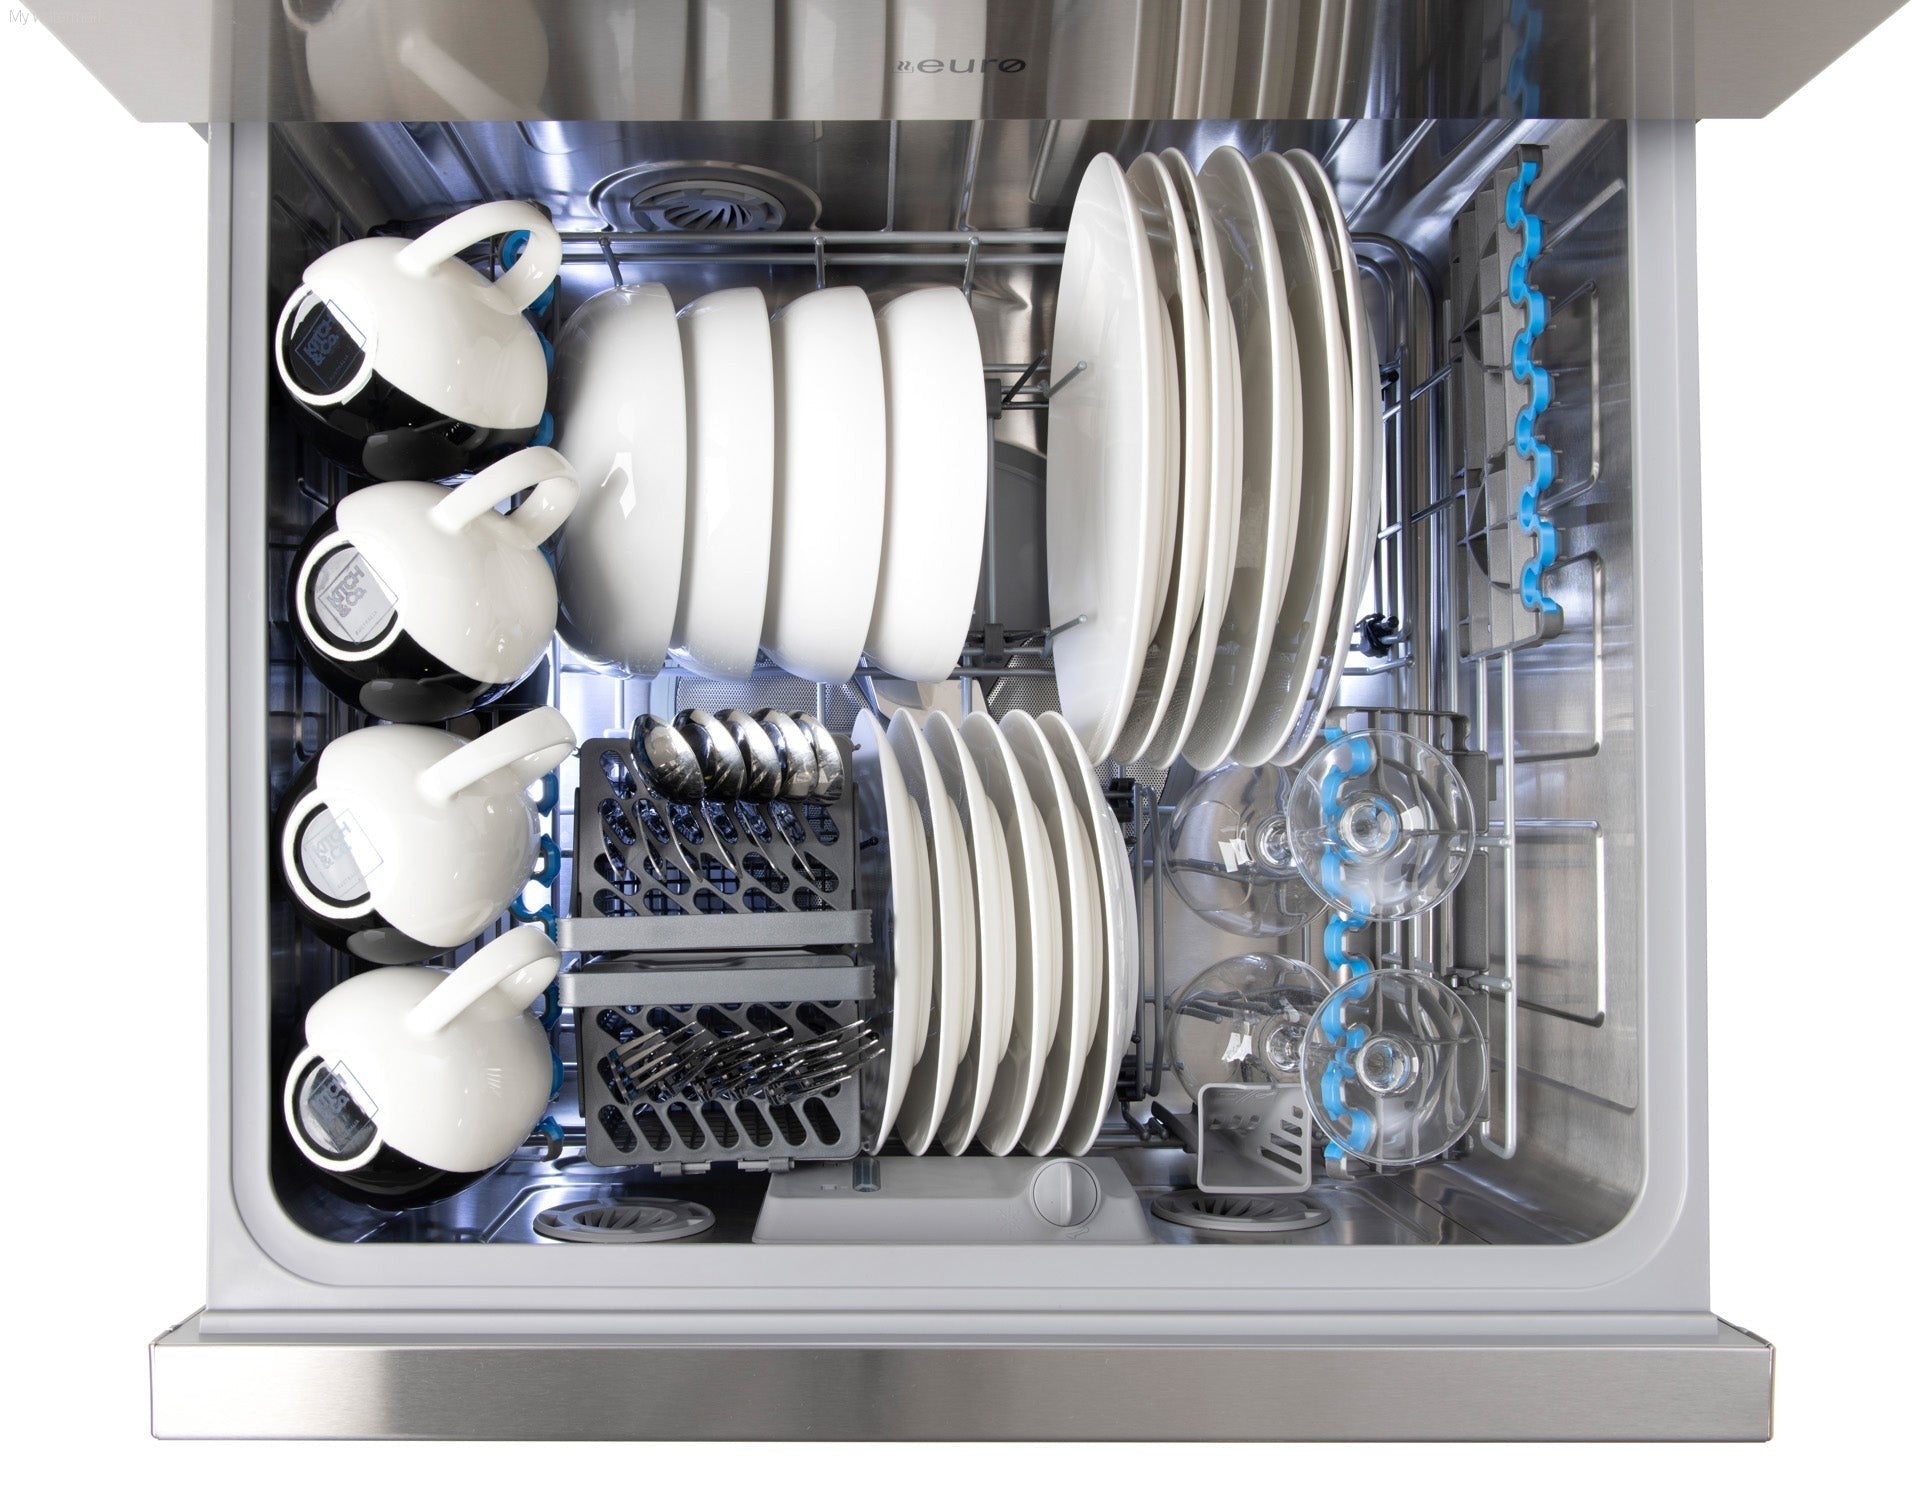 Euro 60cm In-Built Double Drawer Dishwasher